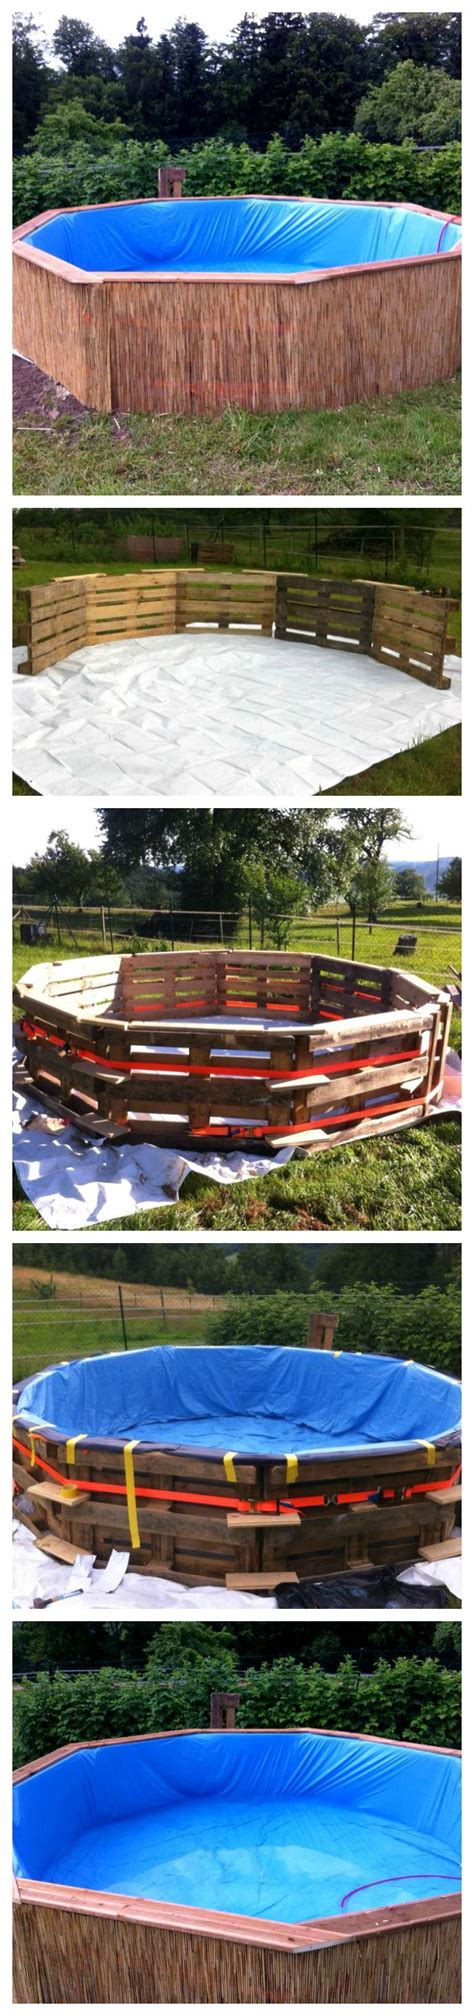 This Backyard Swimming Pool Made Out Of Pallets Will Make Your